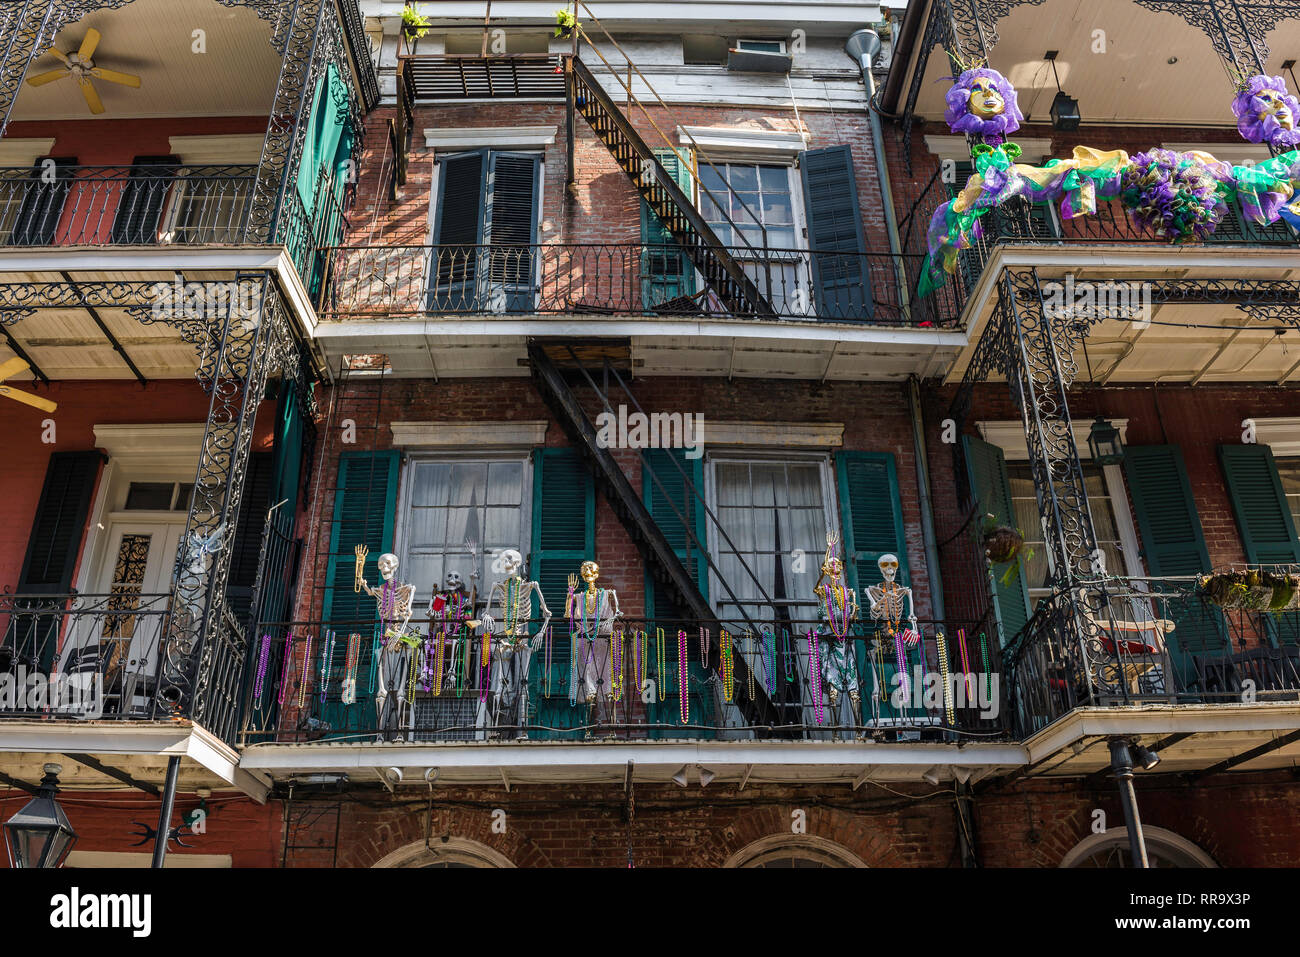 Mardi Gras New Orleans, view of skeletons and colorful throws (beads) decorating a balcony during Mardi Gras in the French Quarter, New Orleans, USA Stock Photo